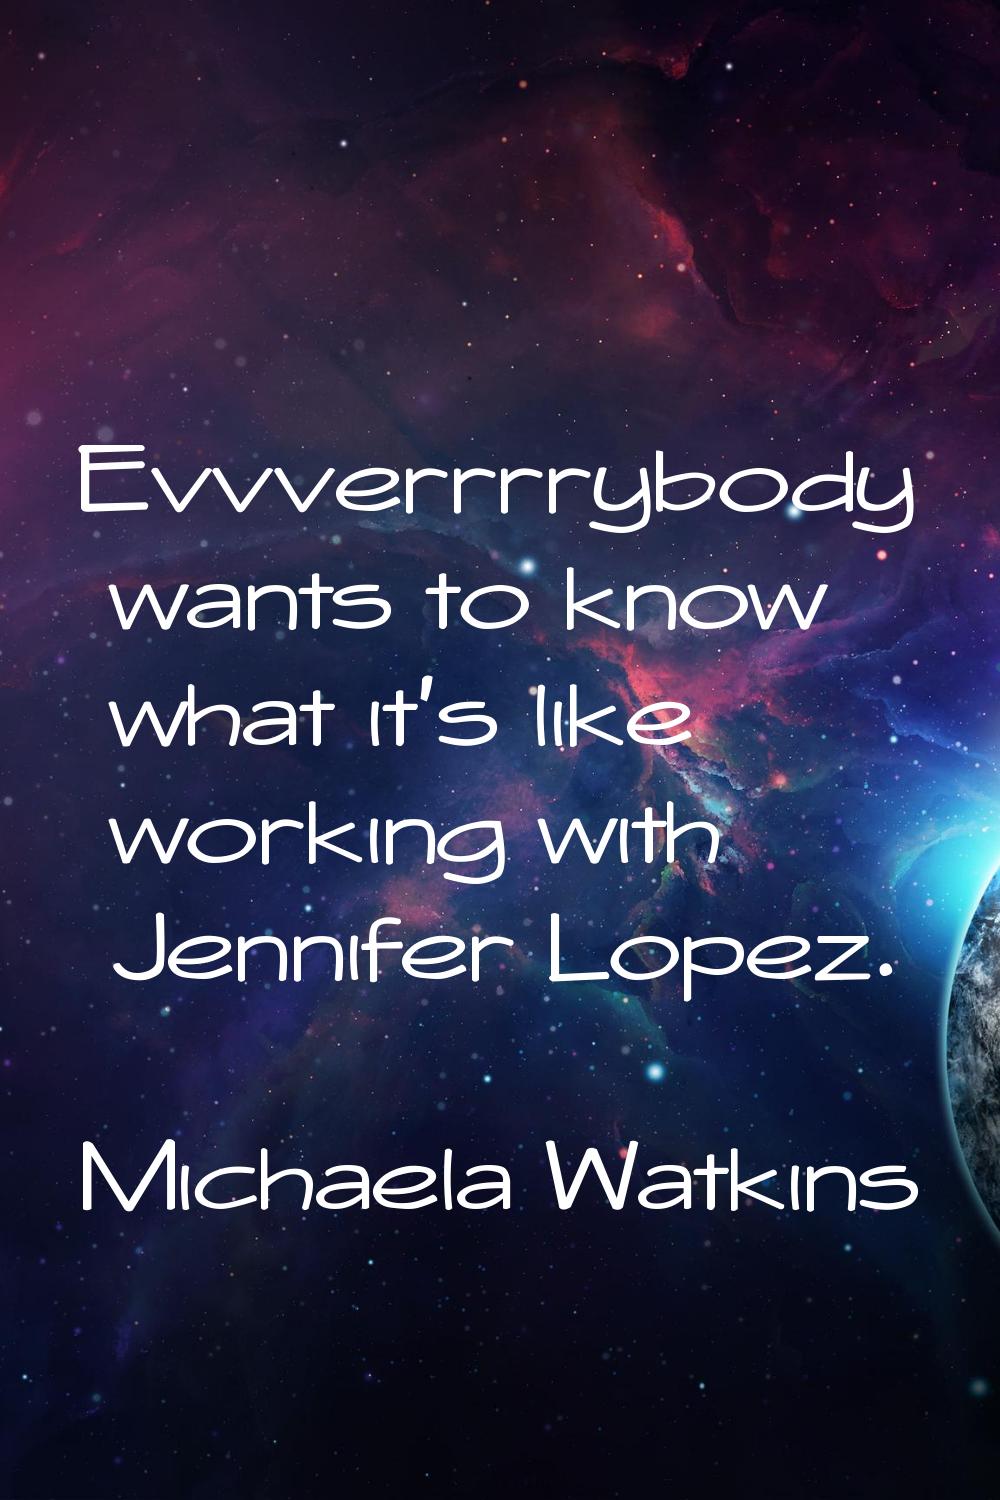 Evvverrrrybody wants to know what it's like working with Jennifer Lopez.